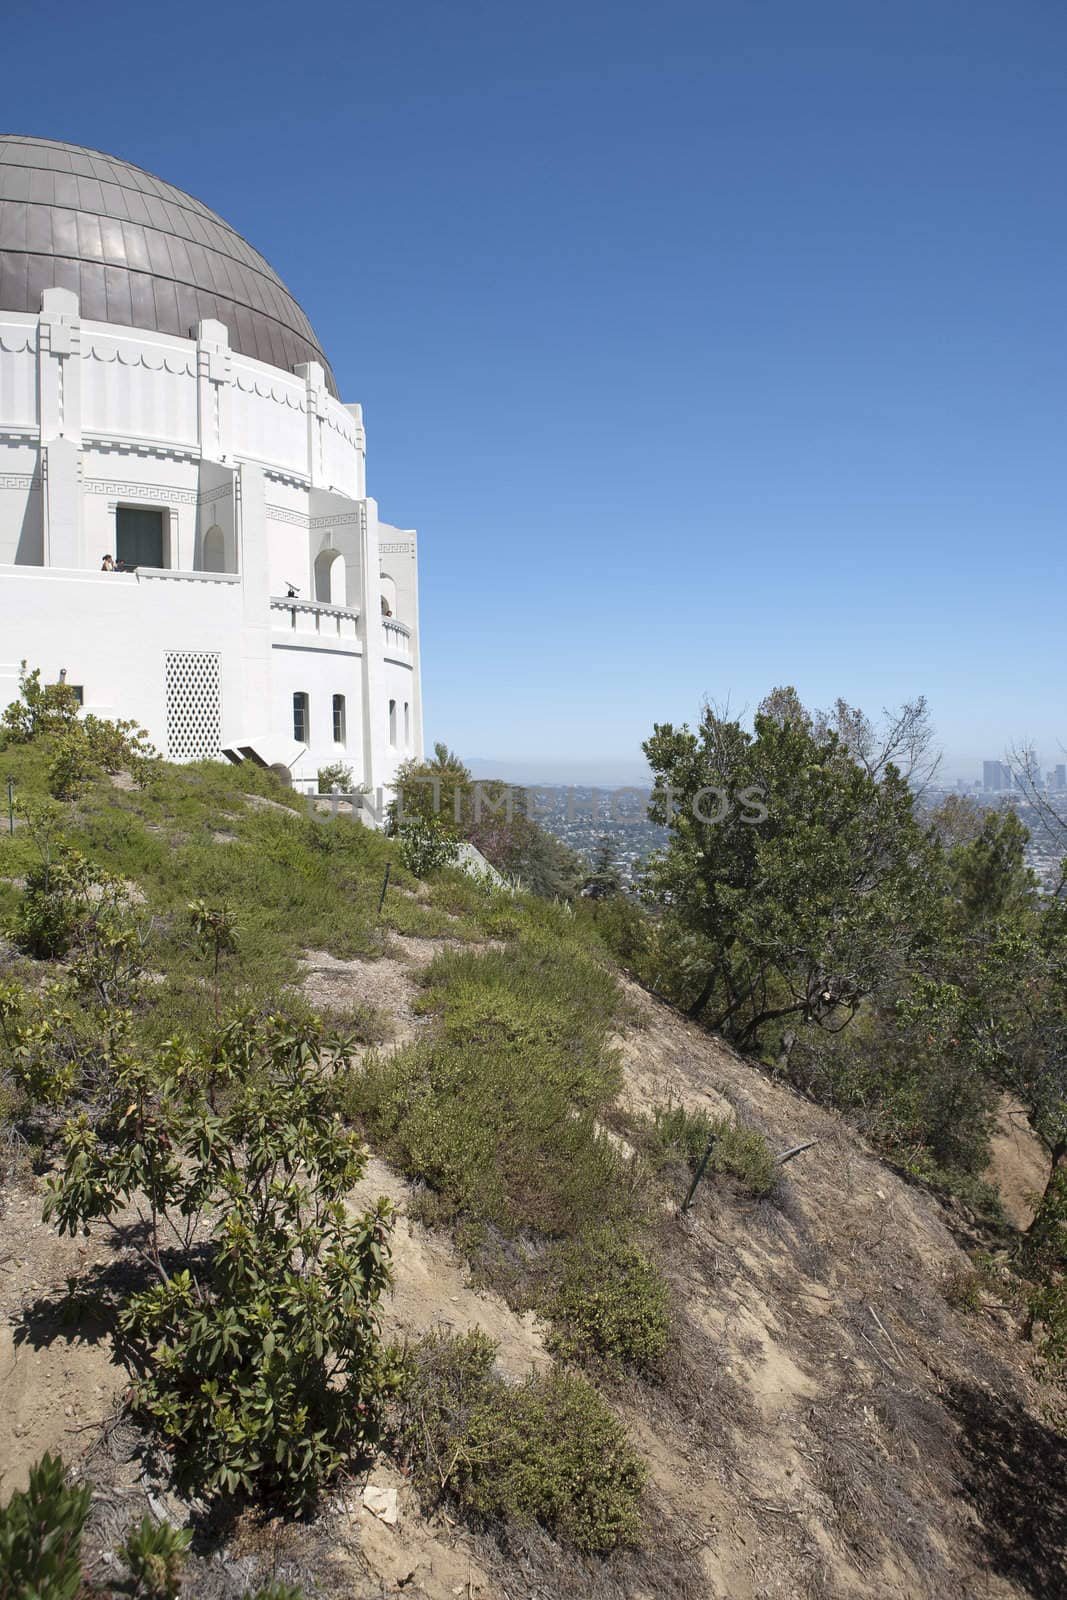 Griffith Observatory in LA, CA. by GeneG